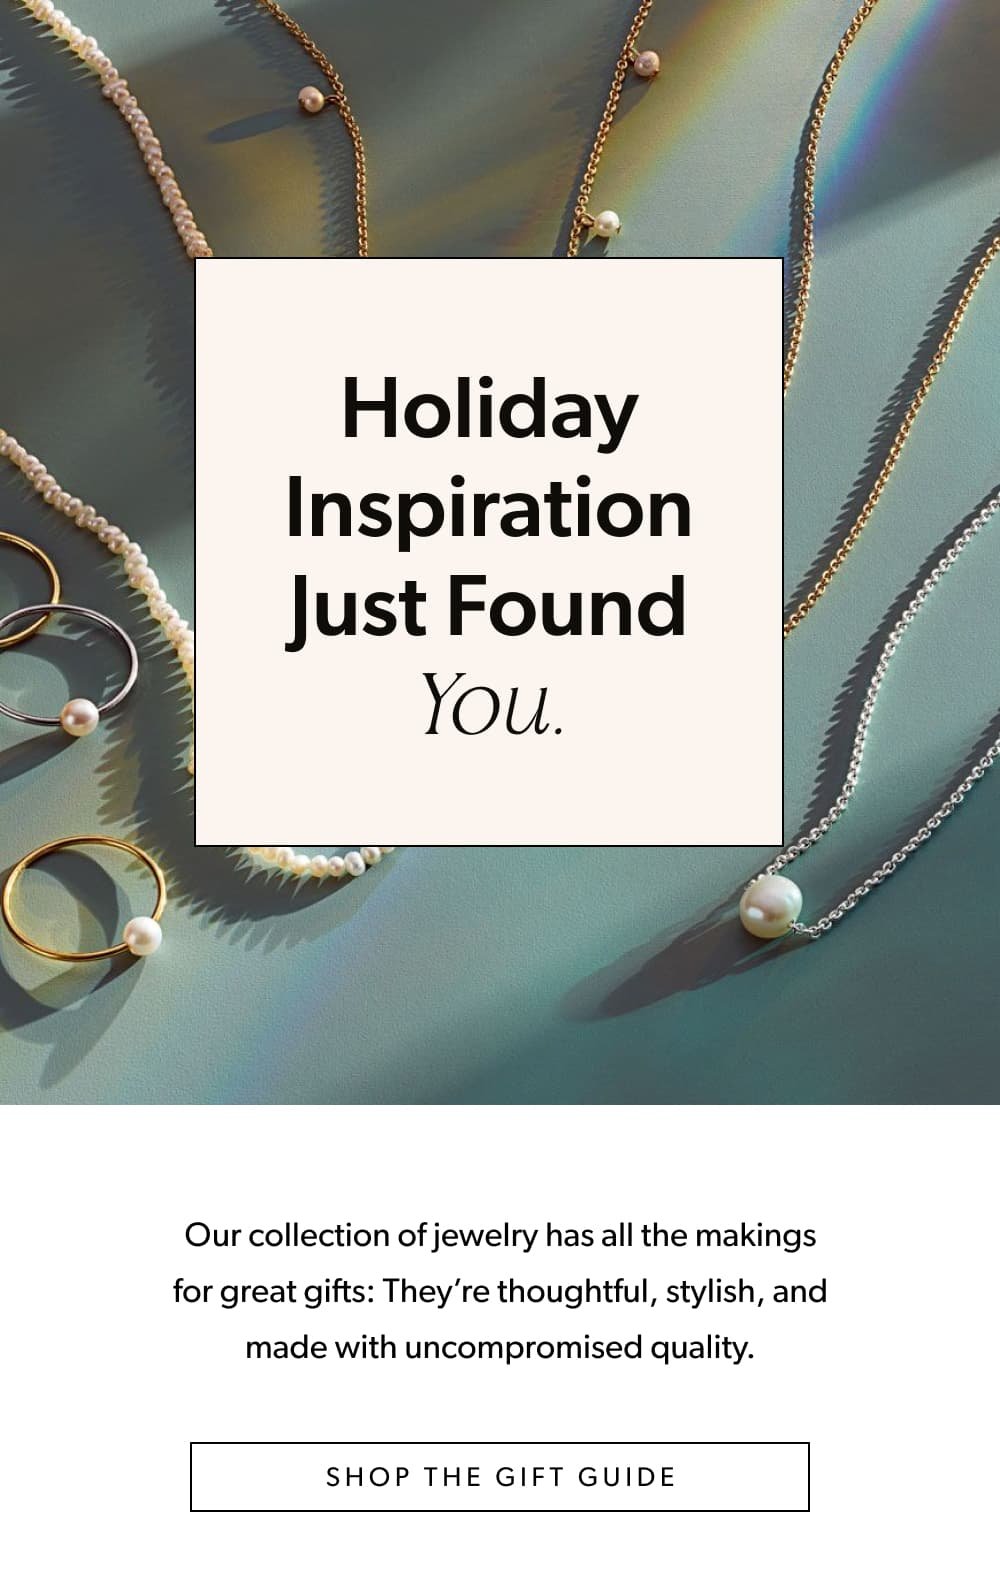 Holiday Inspiration Just Found You.  Our collection of jewelry has all the makings for great gifts: They’re thoughtful, stylish, and made with uncompromised quality.   [Shop the Gift Guide]